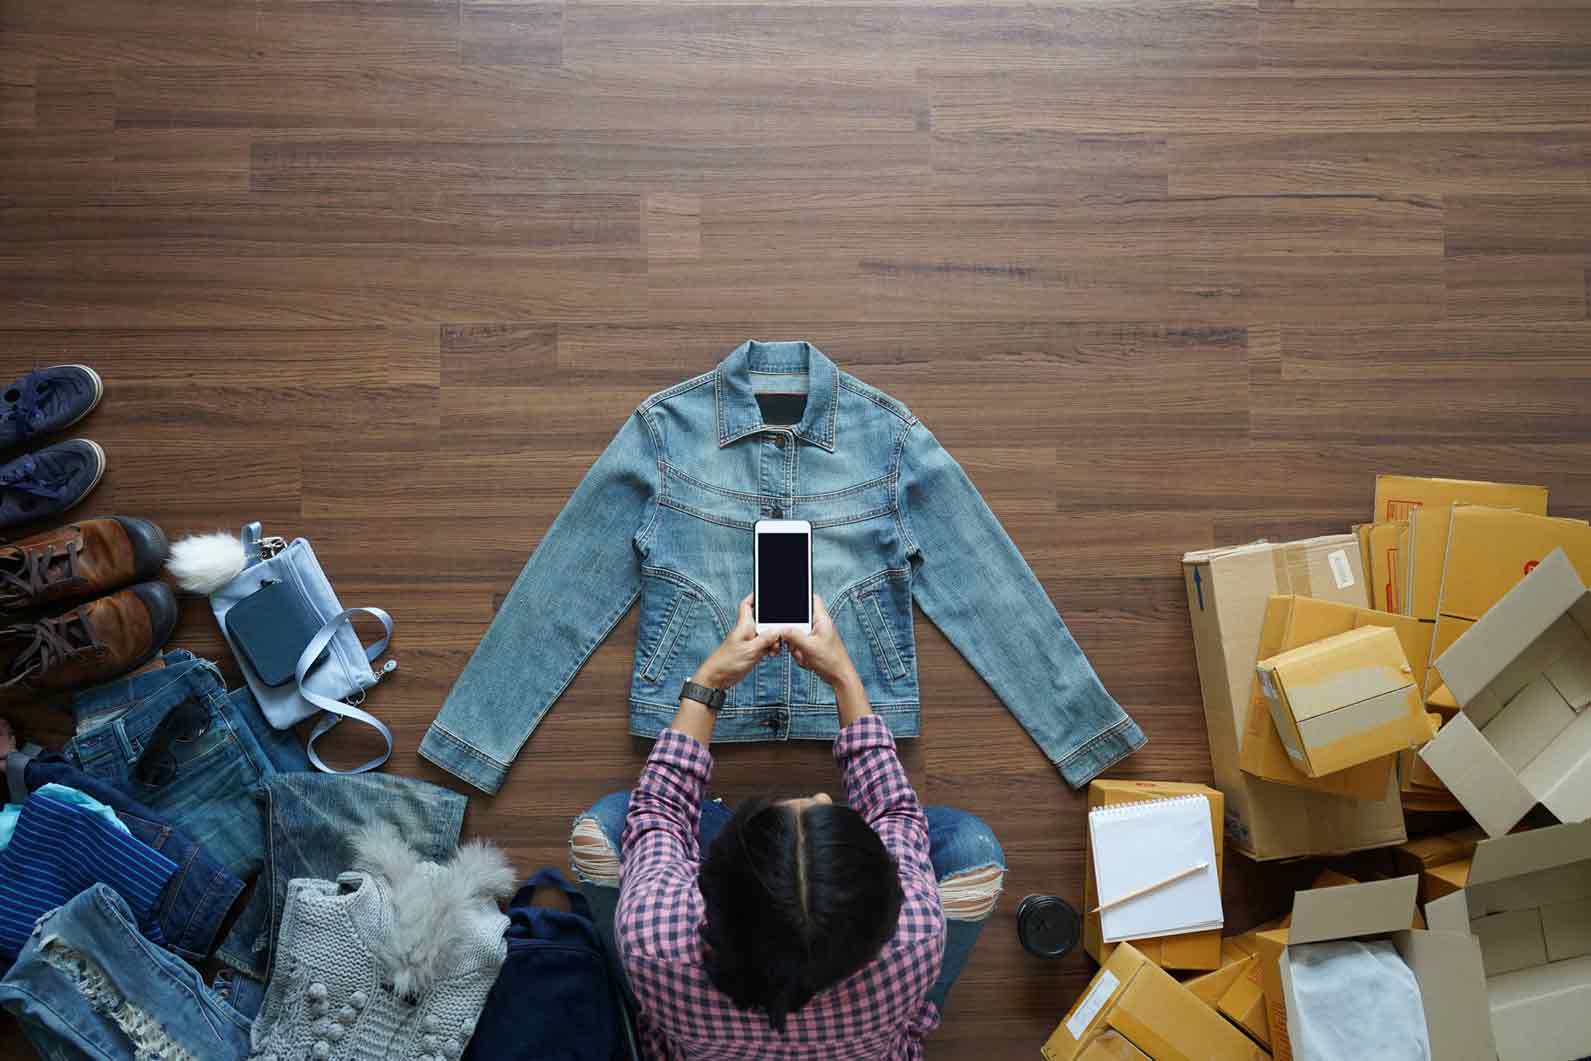 Woman sitting on the floor taking a photo of a denim jacket that she is going to sell on Trade Me. Other items on the floor around her include shoes, bags, a jumper and cardboard boxes she is going to use for shipping.